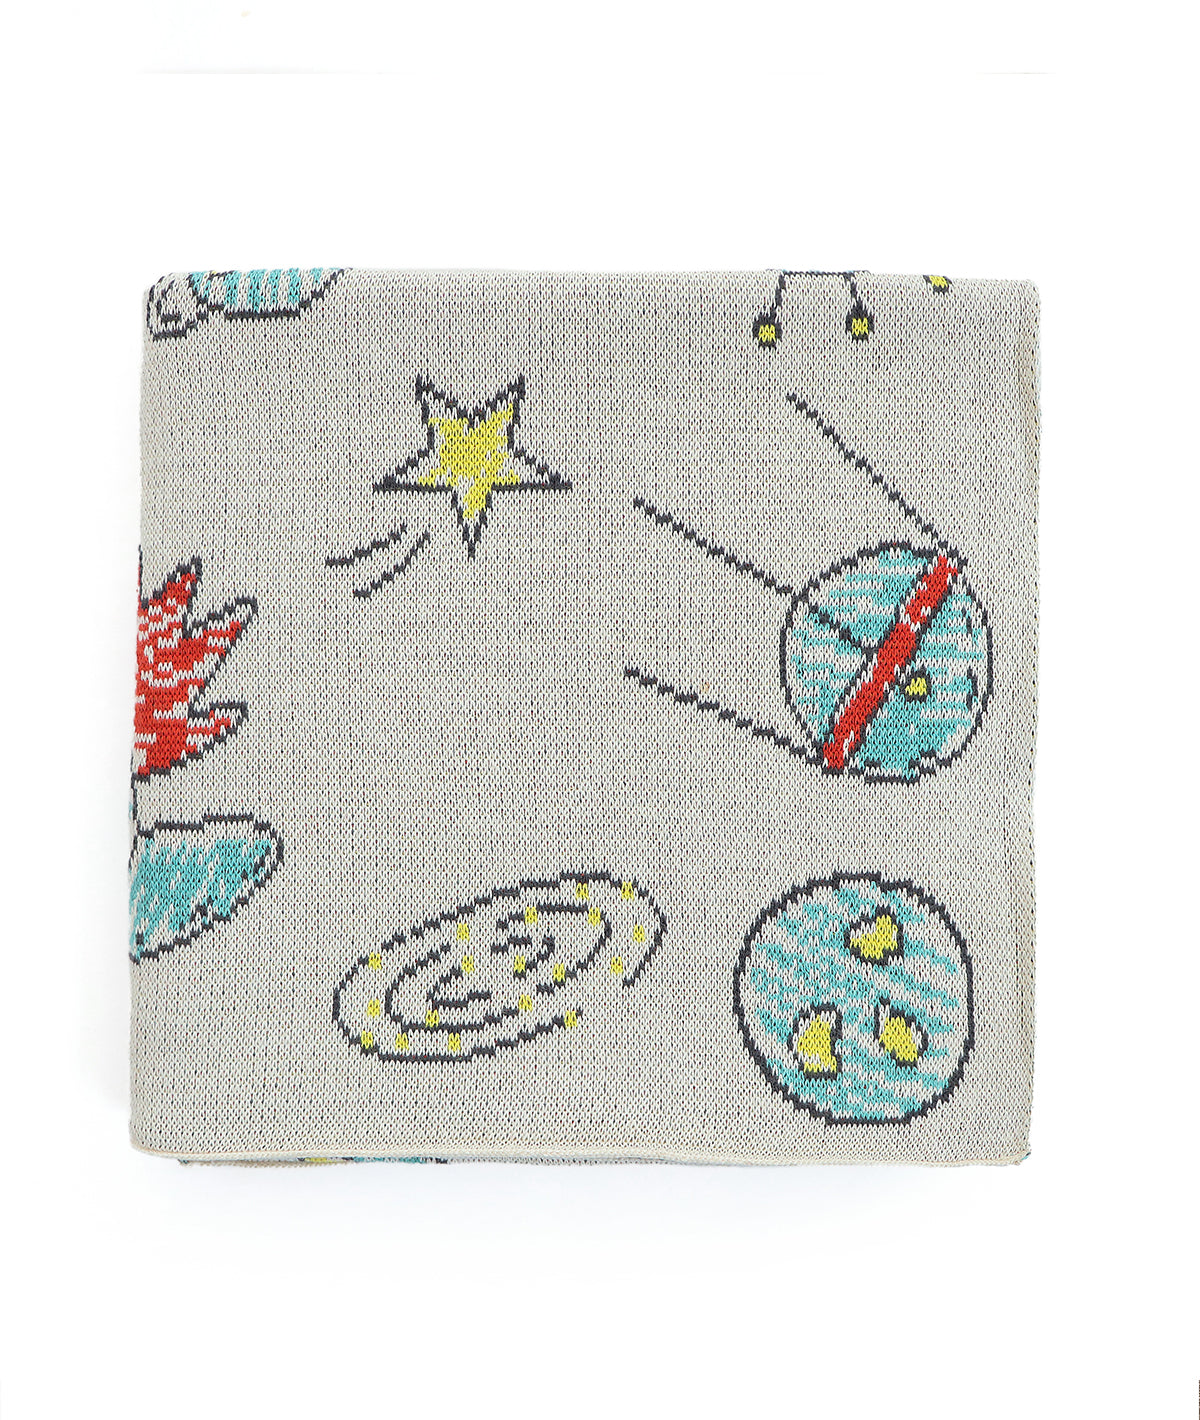 Navigating My Spaceship Multi Color Cotton Knitted AC Blanket For Kids For Use In All Seasons